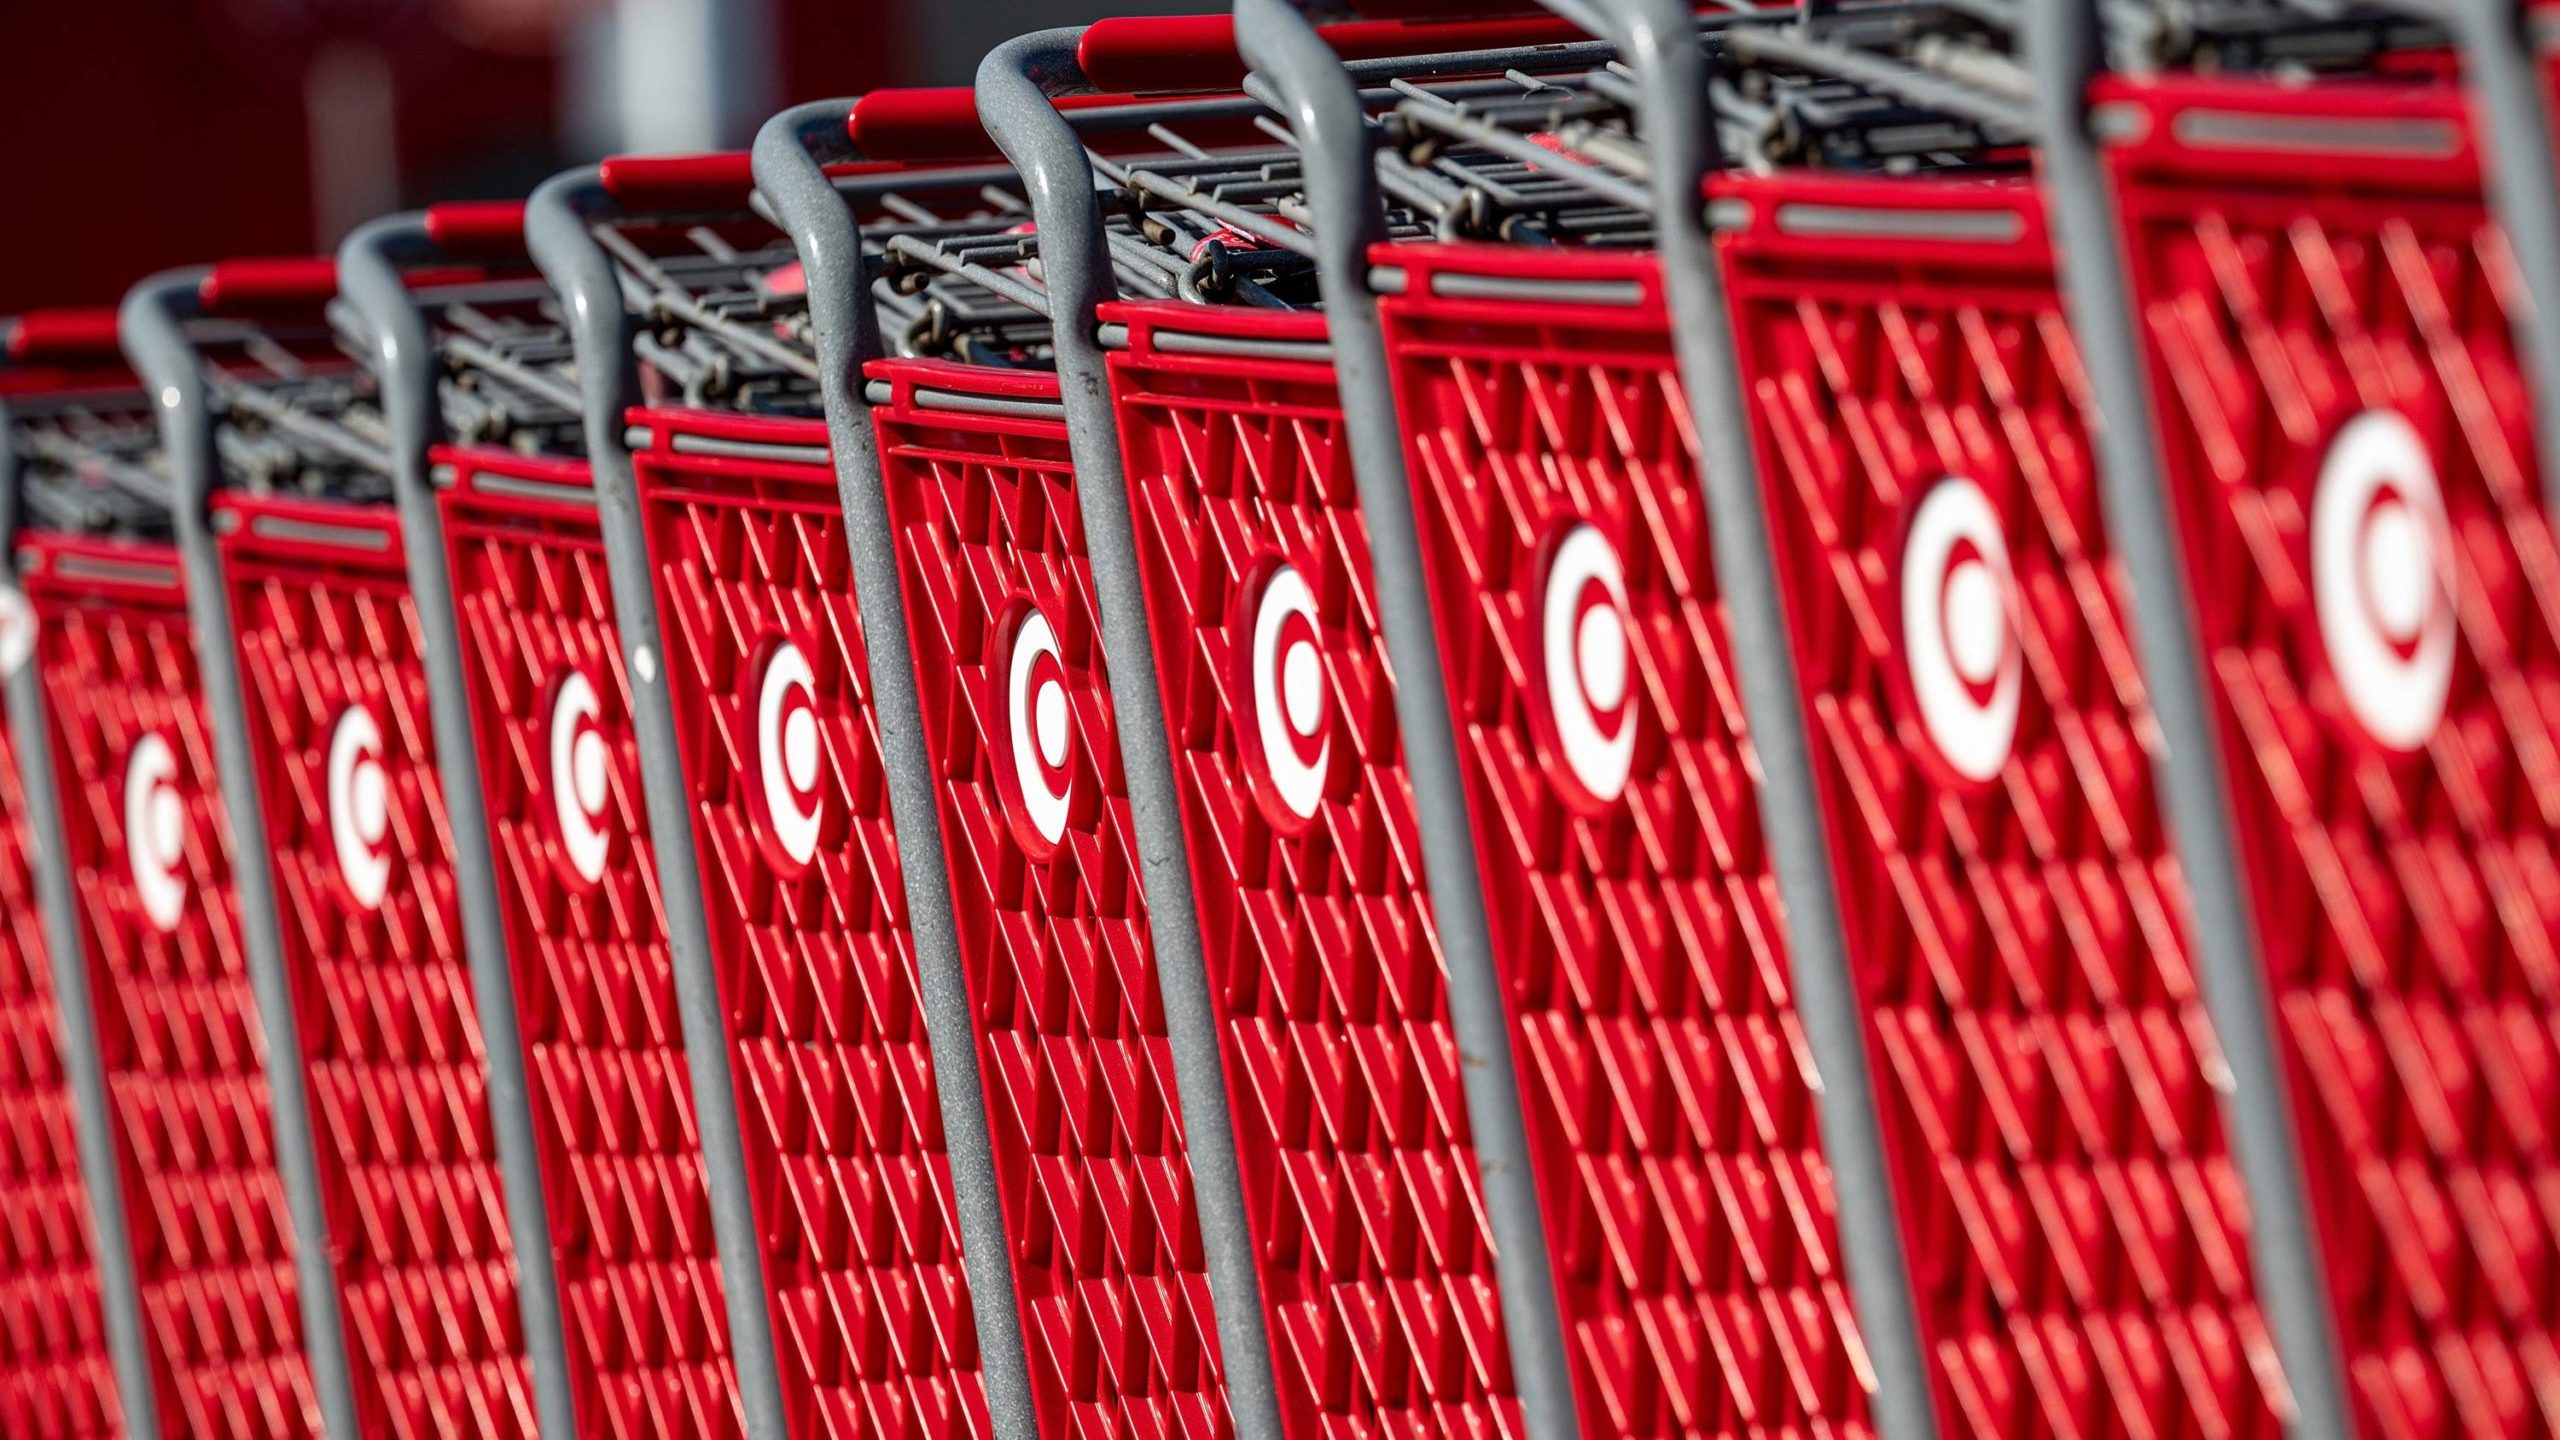 A woman told KSL NewsRadio that two men recently followed her through a Target store. Photographer:...